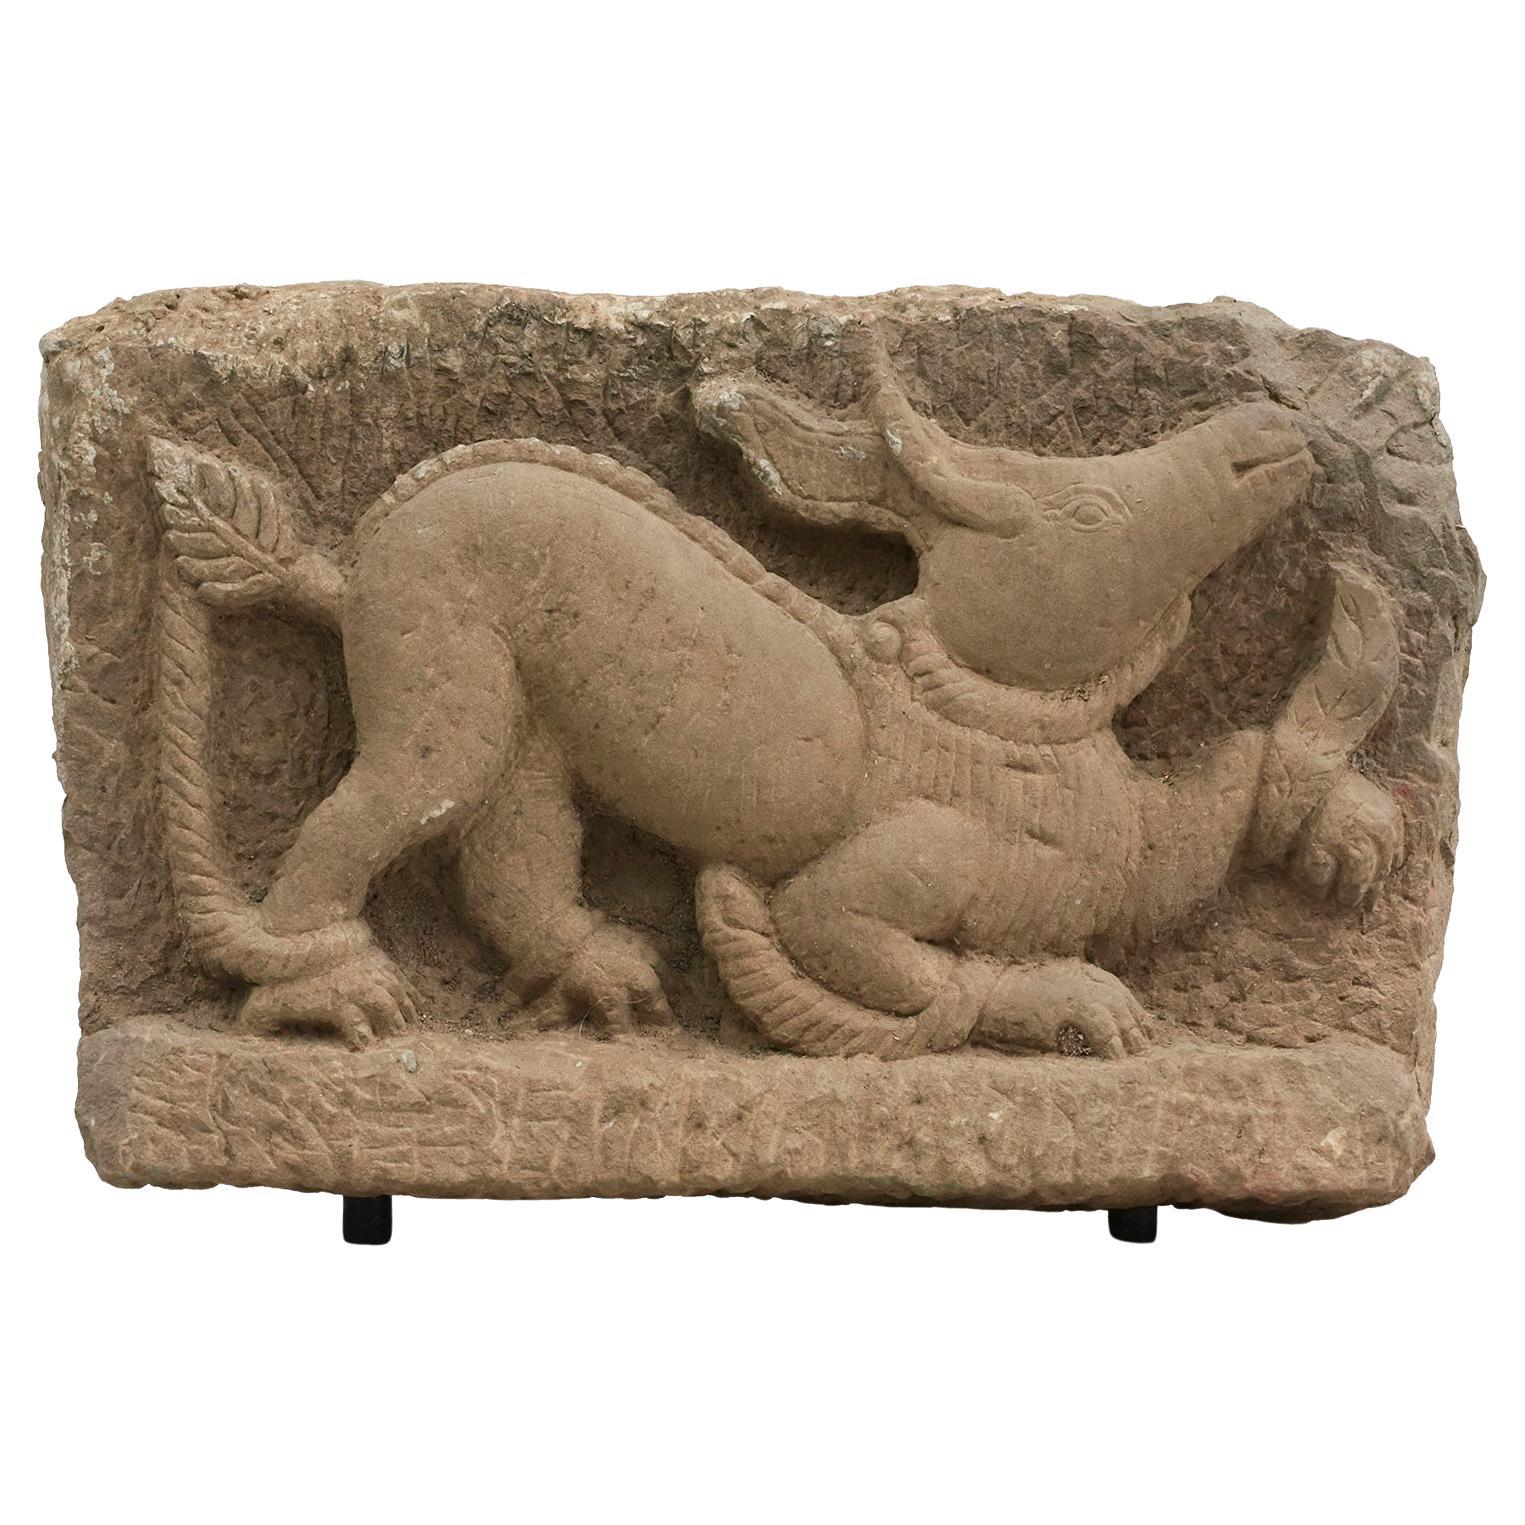 Dragon "Mythical Beast" Sandstone Relief